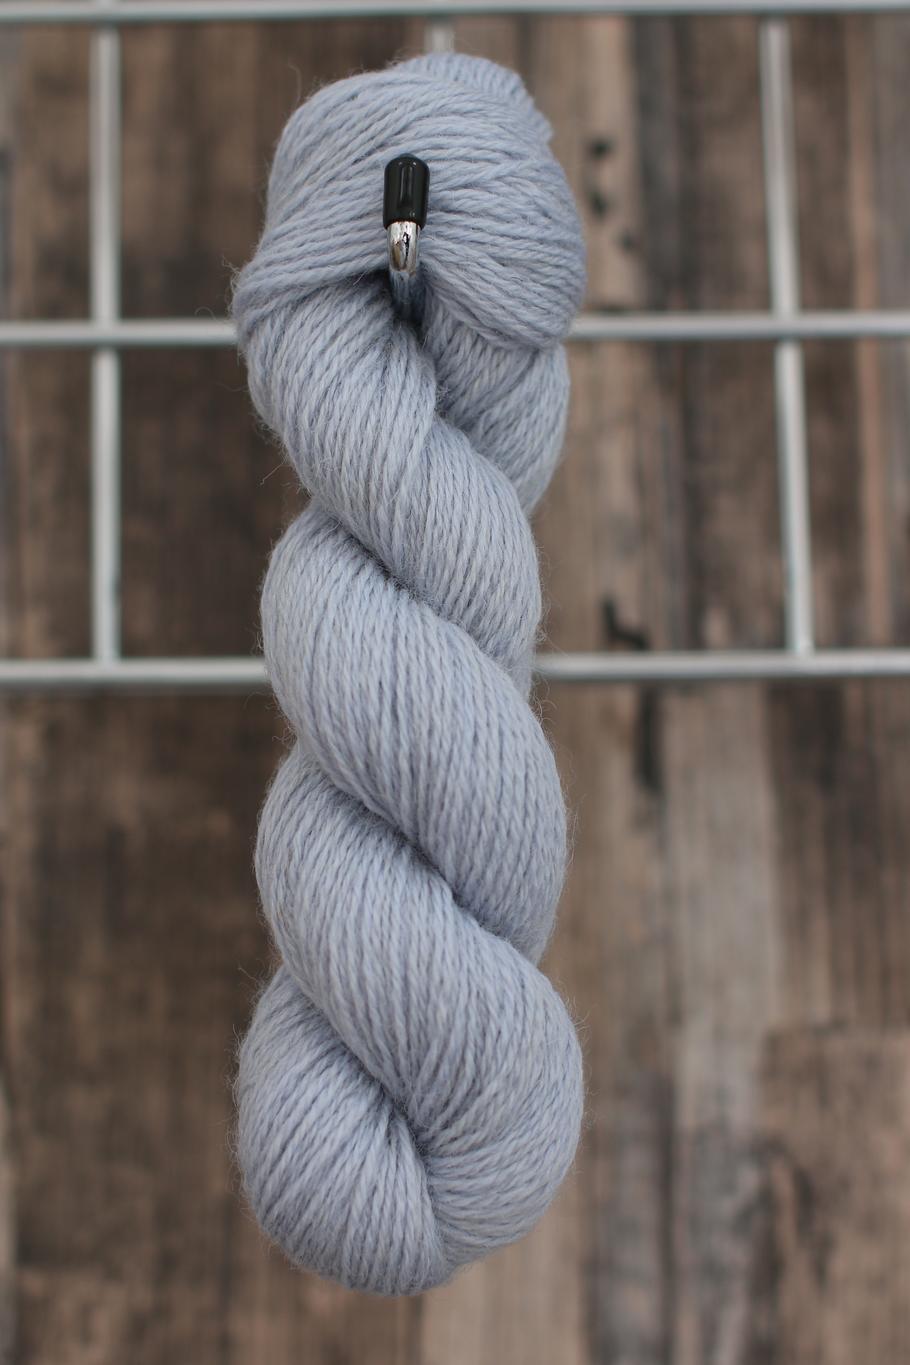 A single skein of pale blue wool hanging from a hook